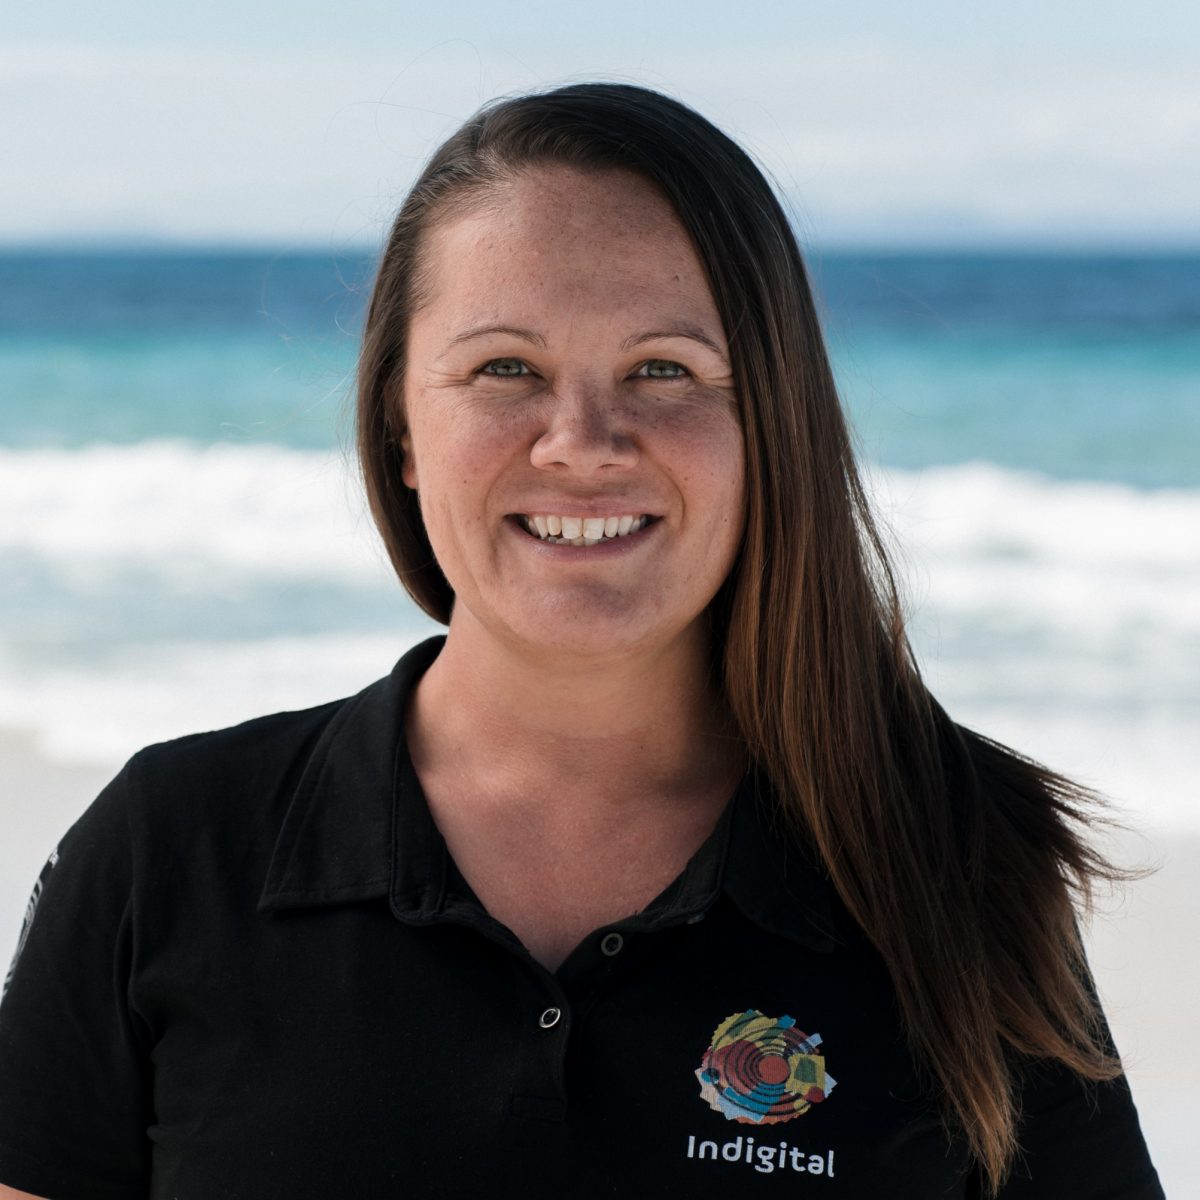 A smiling woman in a black polo shirt in front of the ocean